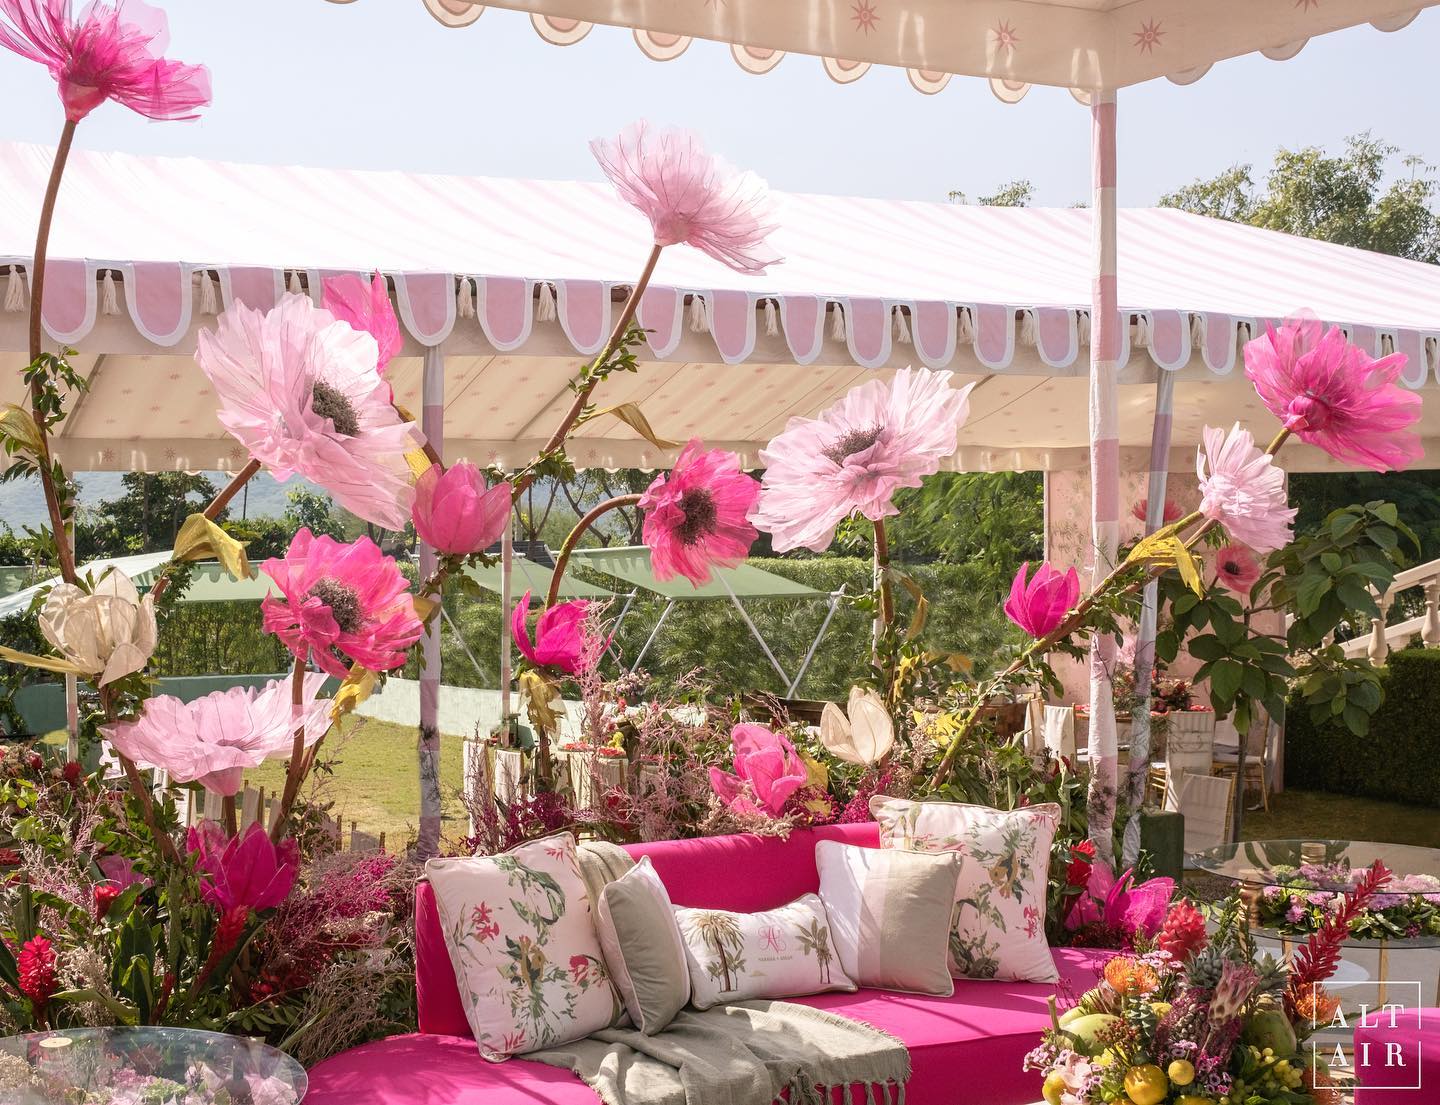 8 Ways To Add That 'Barbie Pink' Touch To Your Wedding